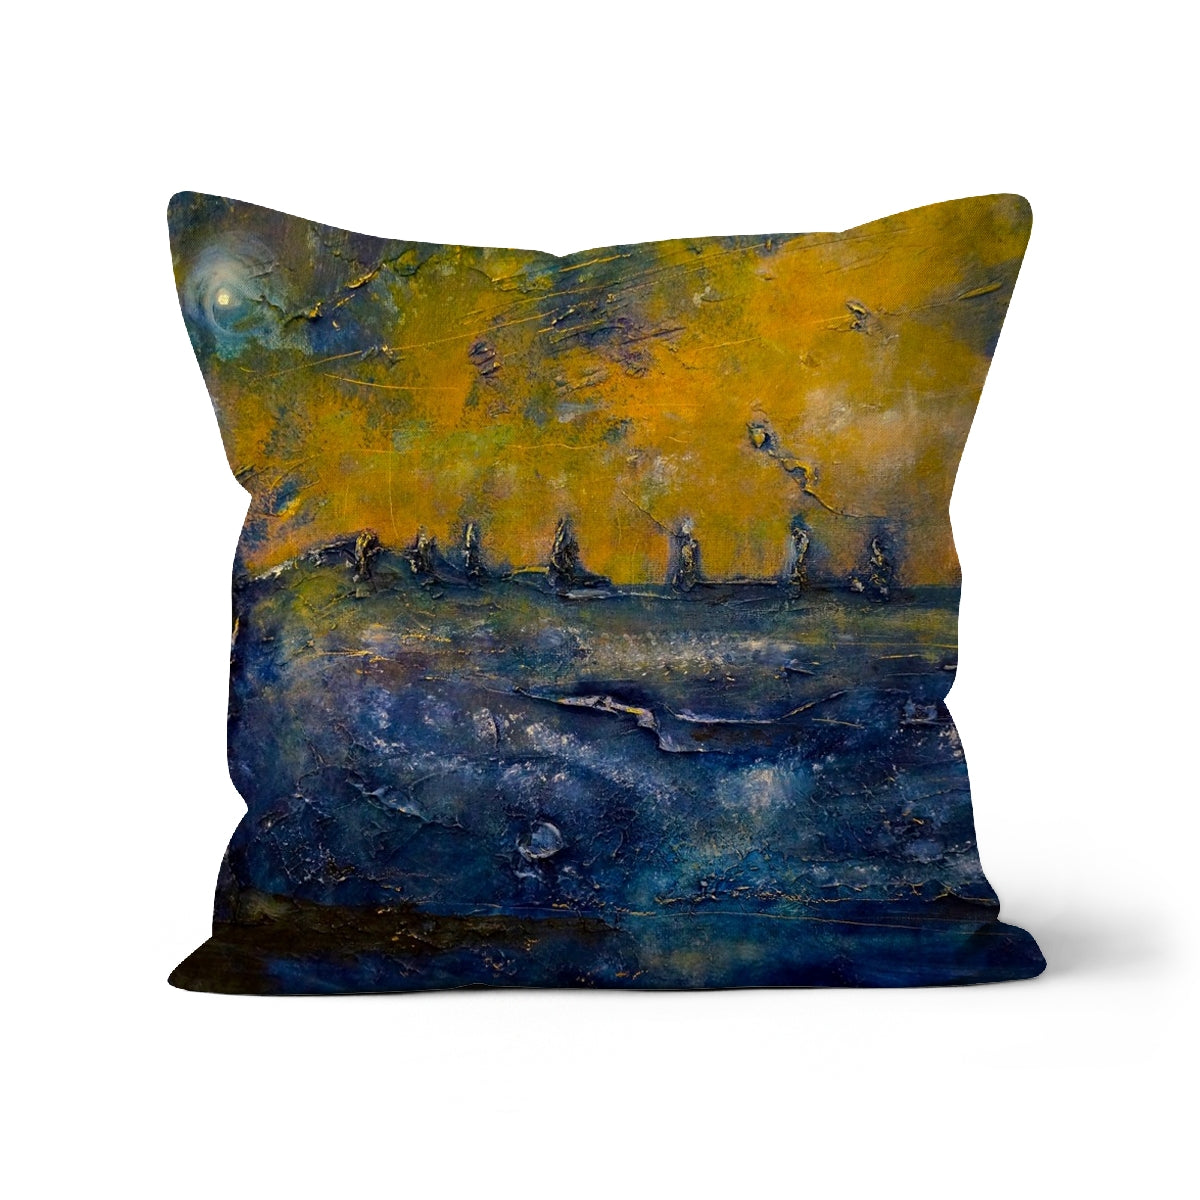 Brodgar Moonlight Orkney Art Gifts Cushion-Cushions-Orkney Art Gallery-Linen-16"x16"-Paintings, Prints, Homeware, Art Gifts From Scotland By Scottish Artist Kevin Hunter